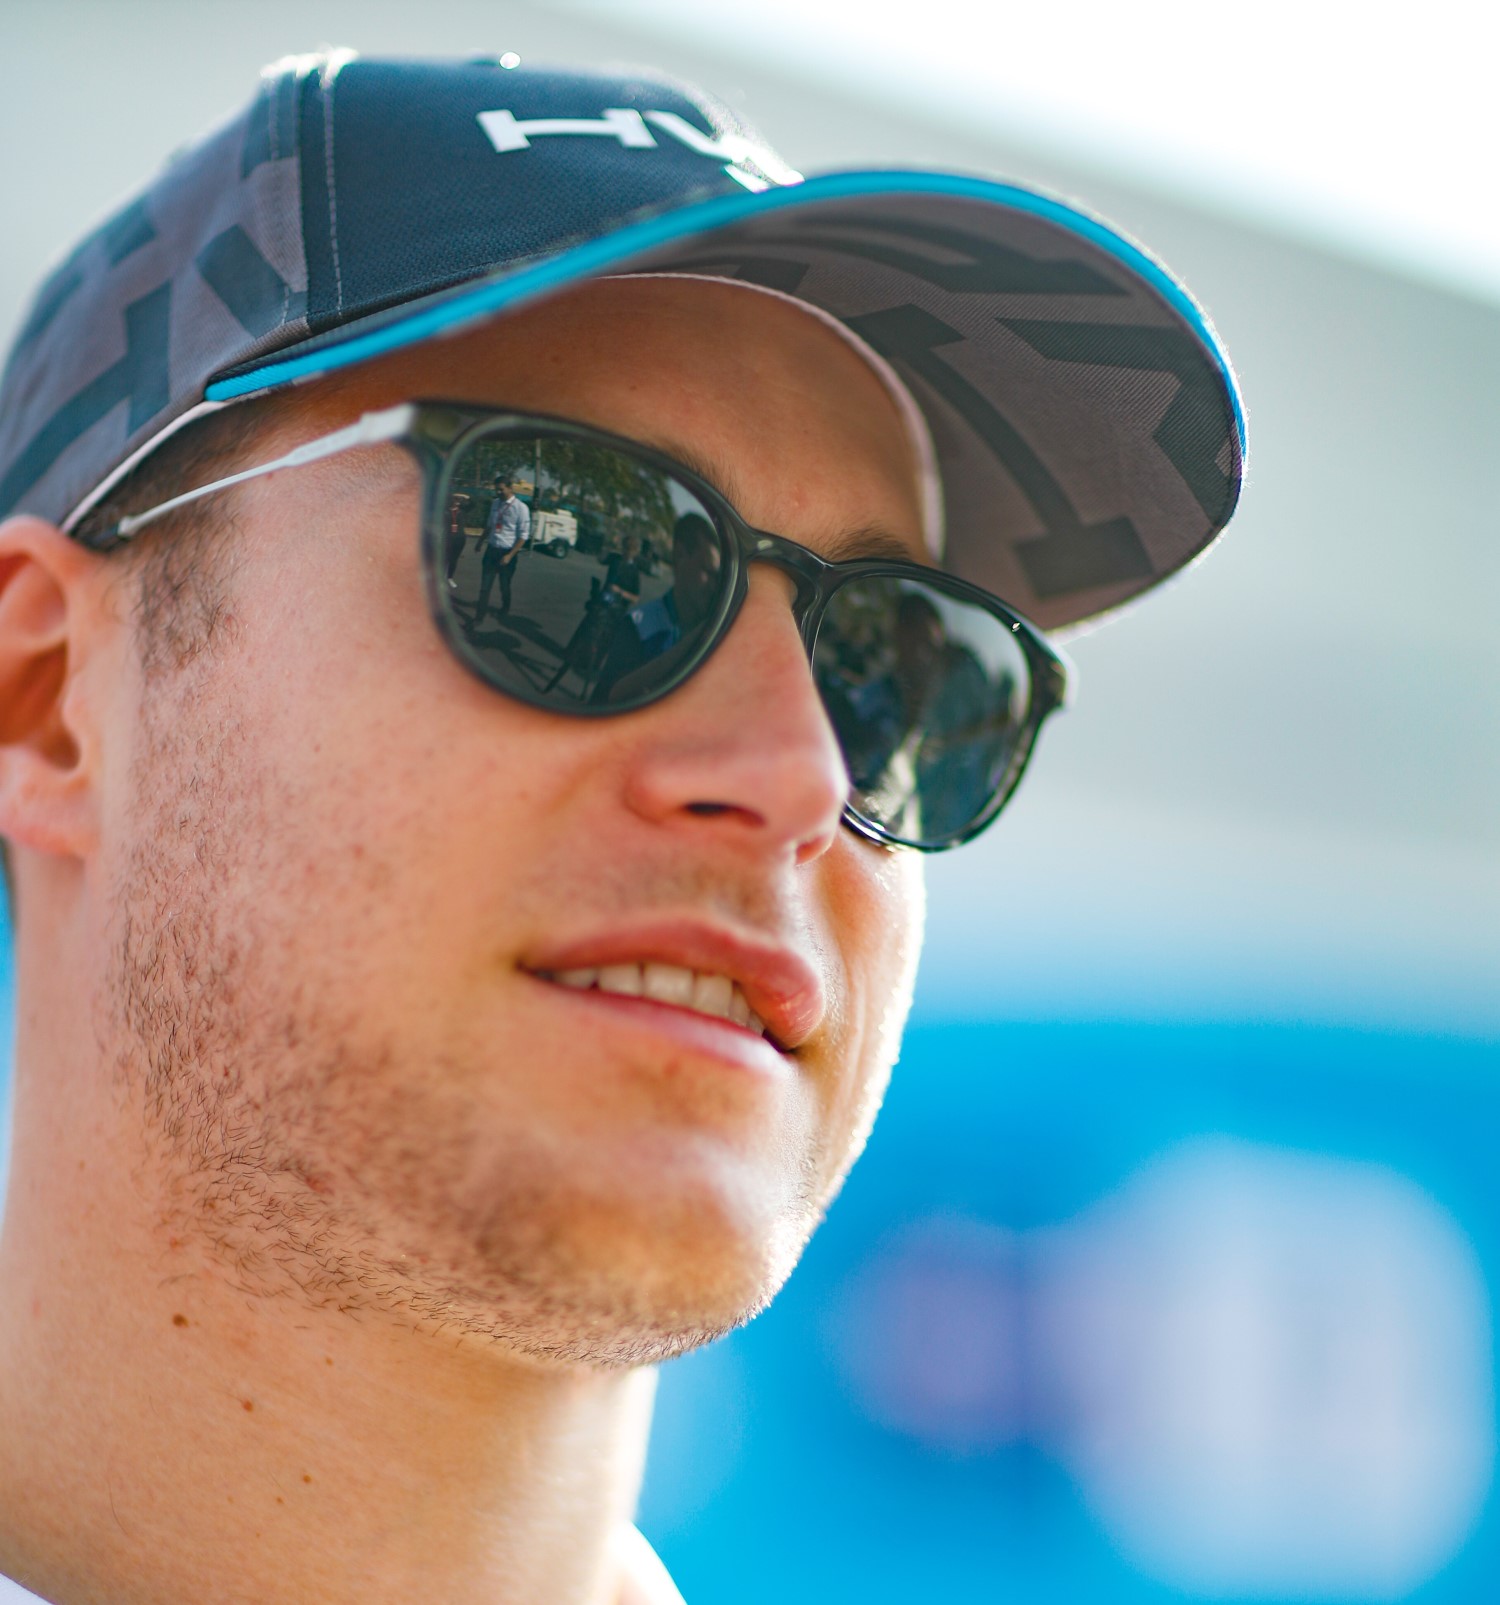 After being destroyed by teammate Fernando Alonso at McLaren, Stoffel Vandoorne still thinks he is F1 material